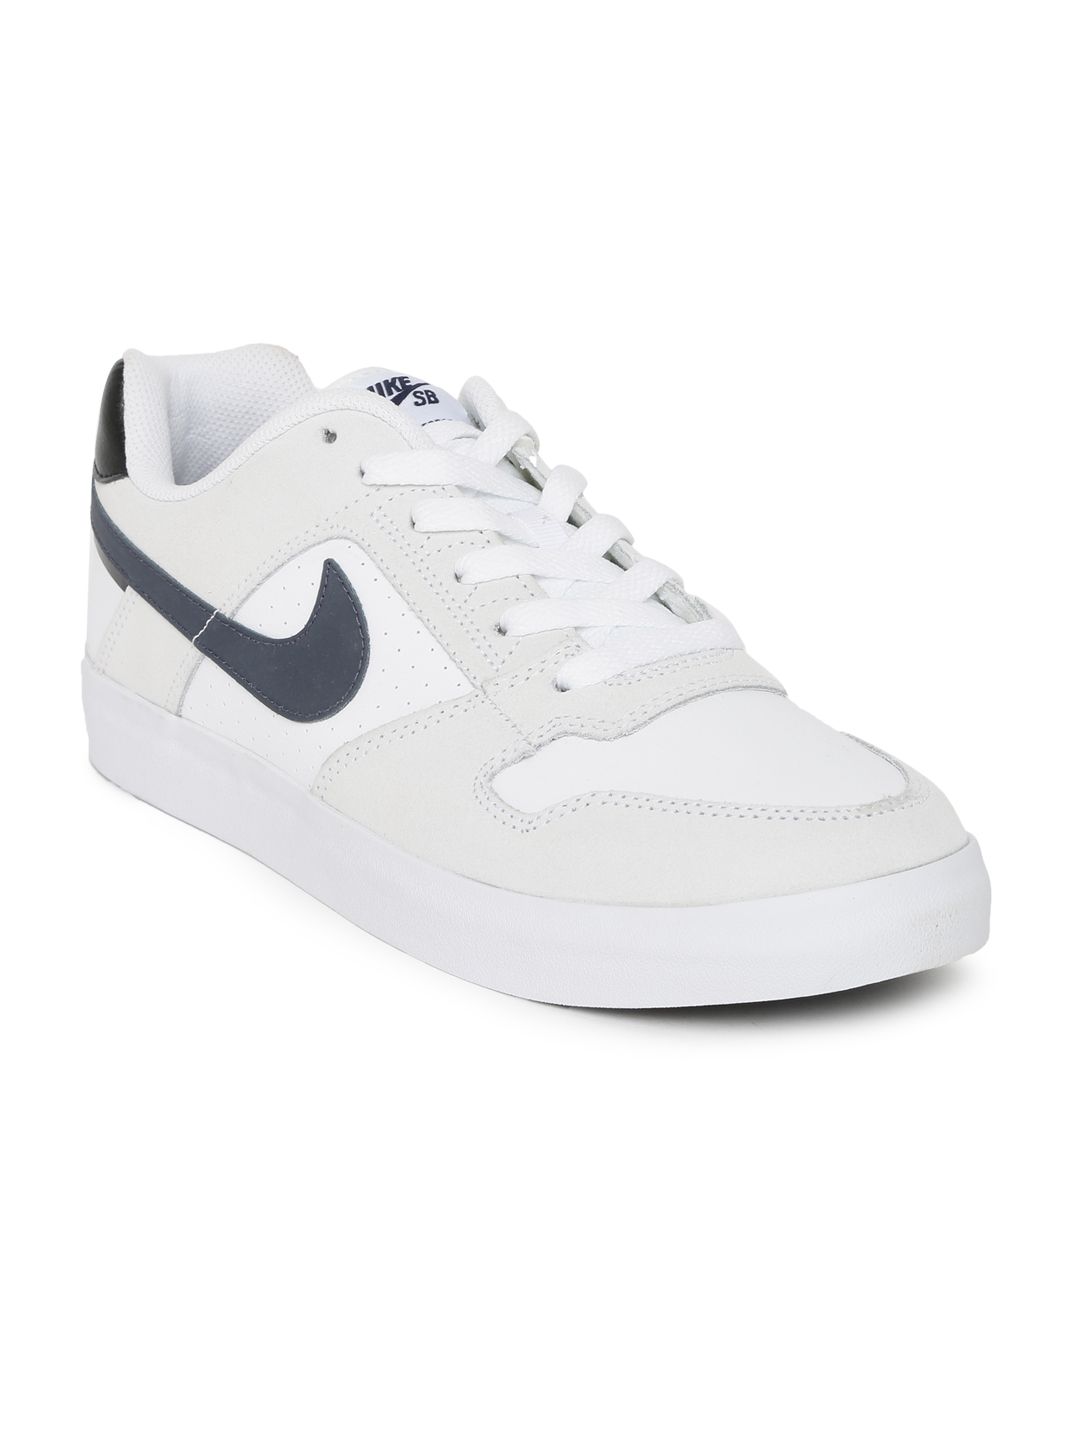 Nike Unisex White Solid SB DELTA FORCE VULC Leather Skateboarding Shoes Price in India